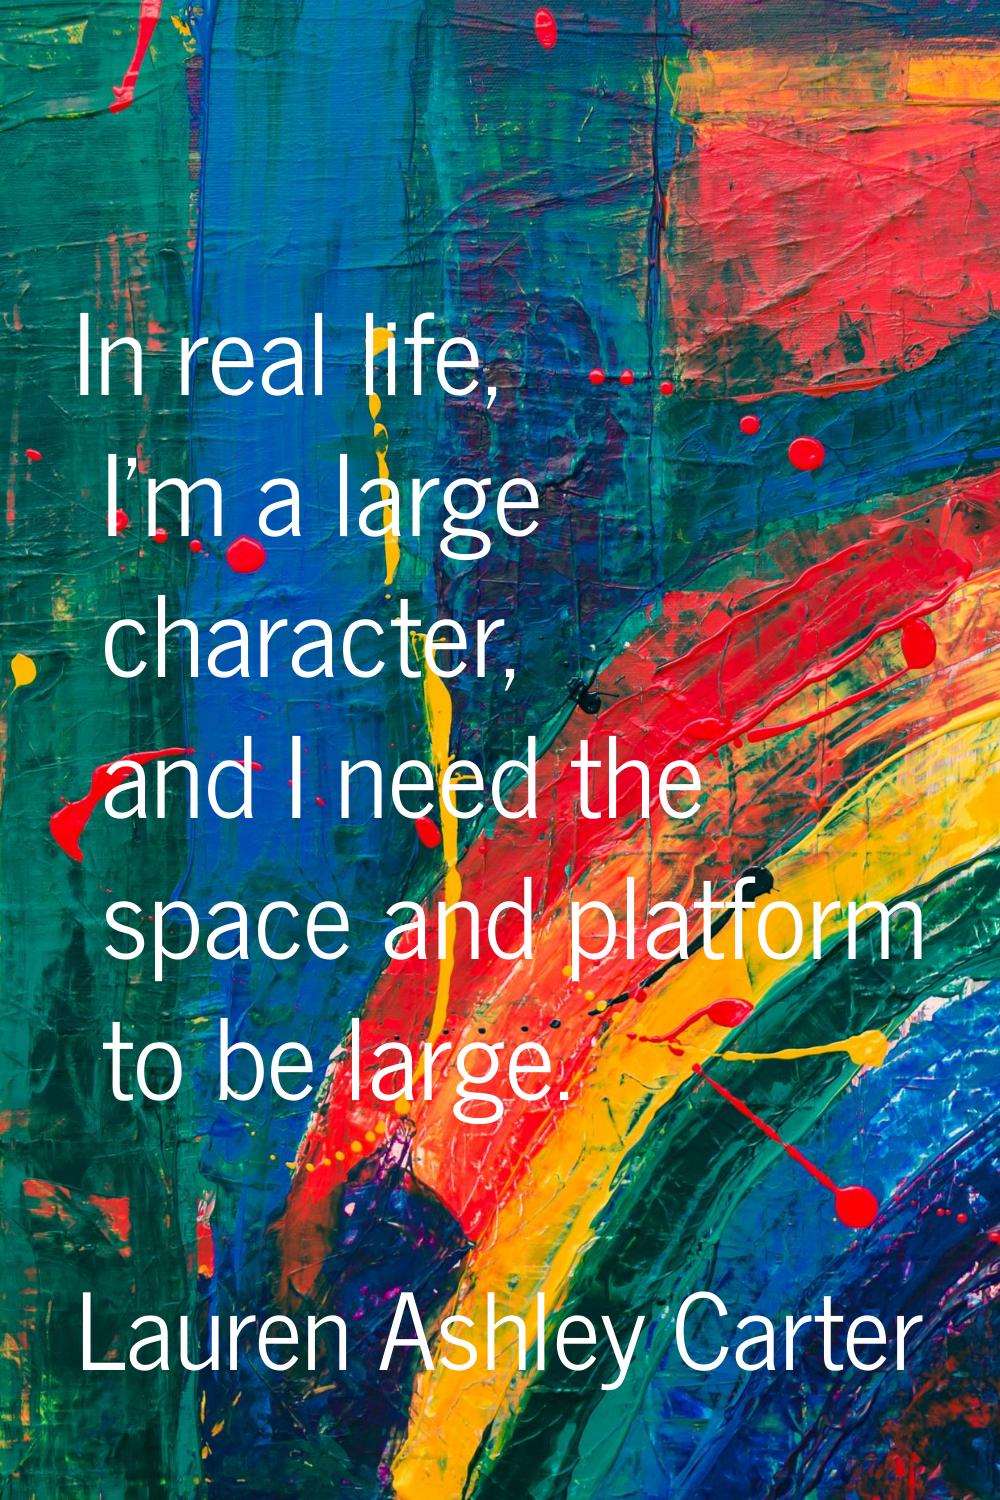 In real life, I'm a large character, and I need the space and platform to be large.